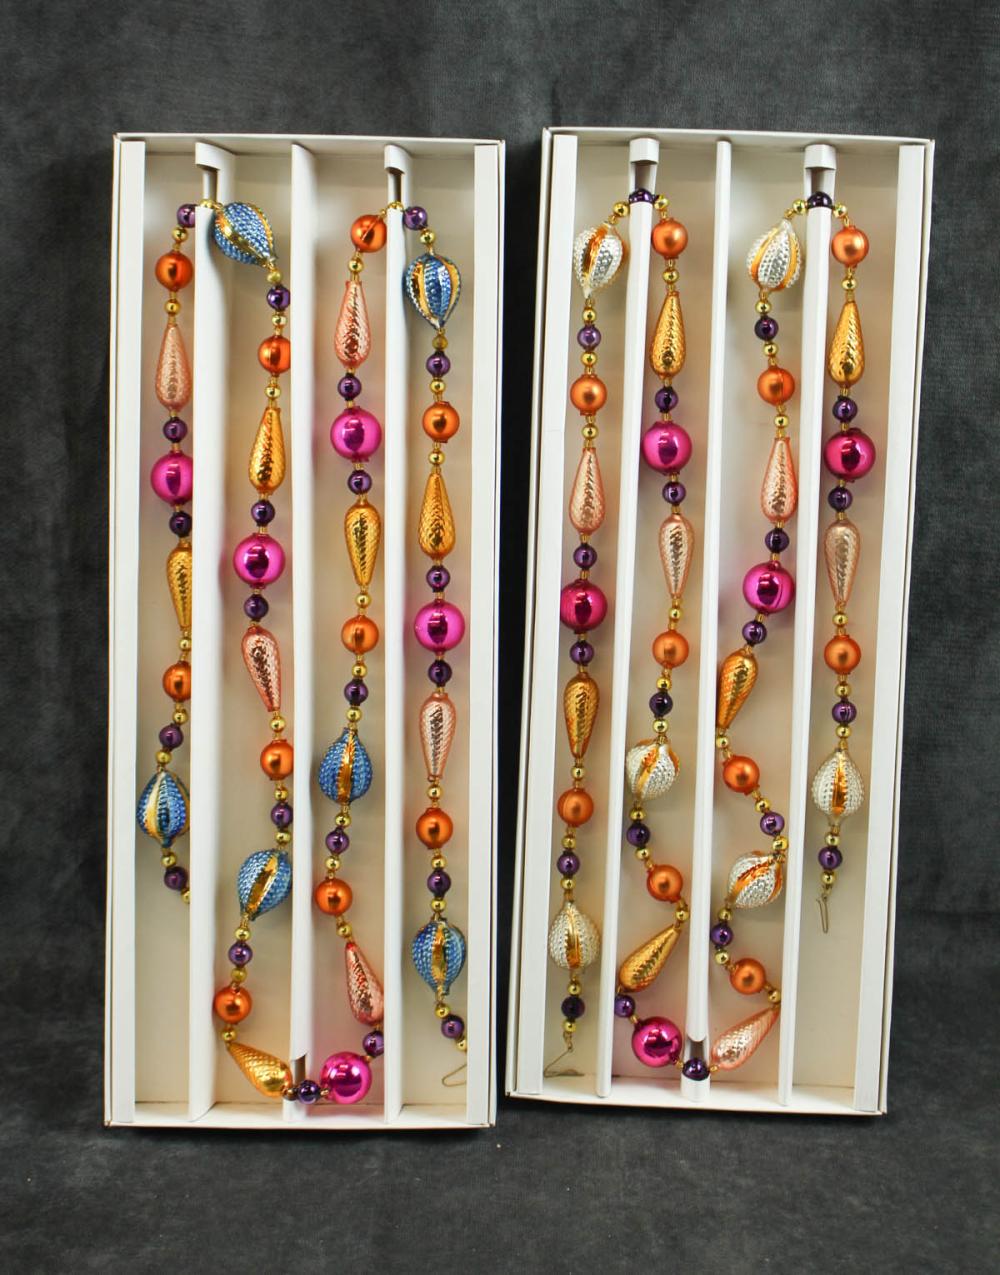 FORTY FOUR BLOWN GLASS ORNAMENTS 342856